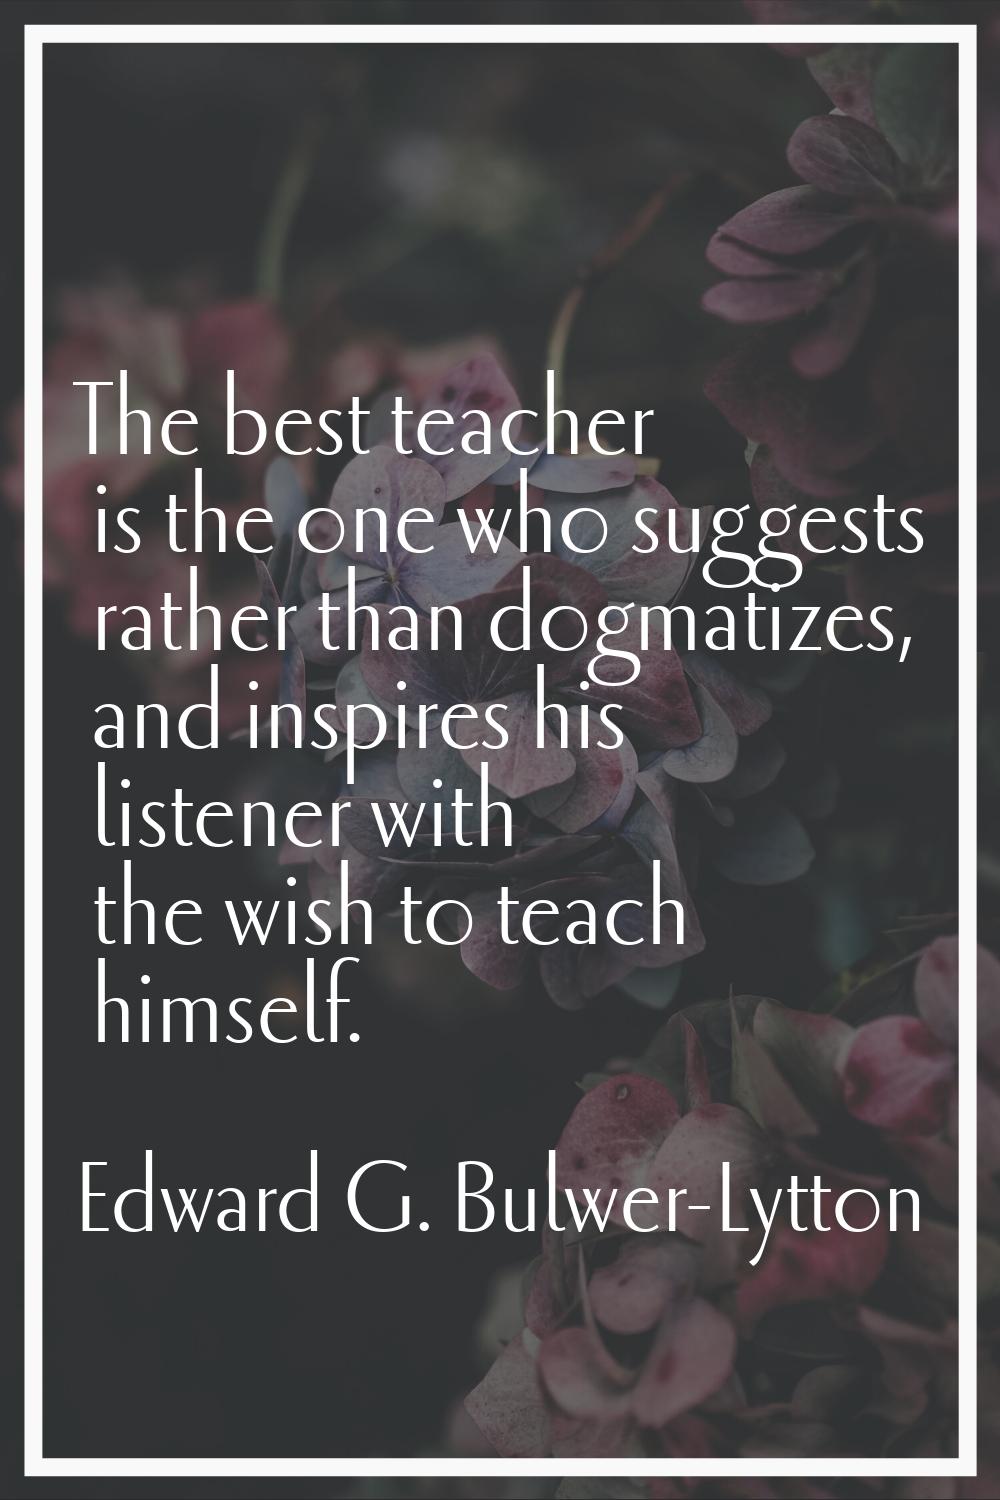 The best teacher is the one who suggests rather than dogmatizes, and inspires his listener with the